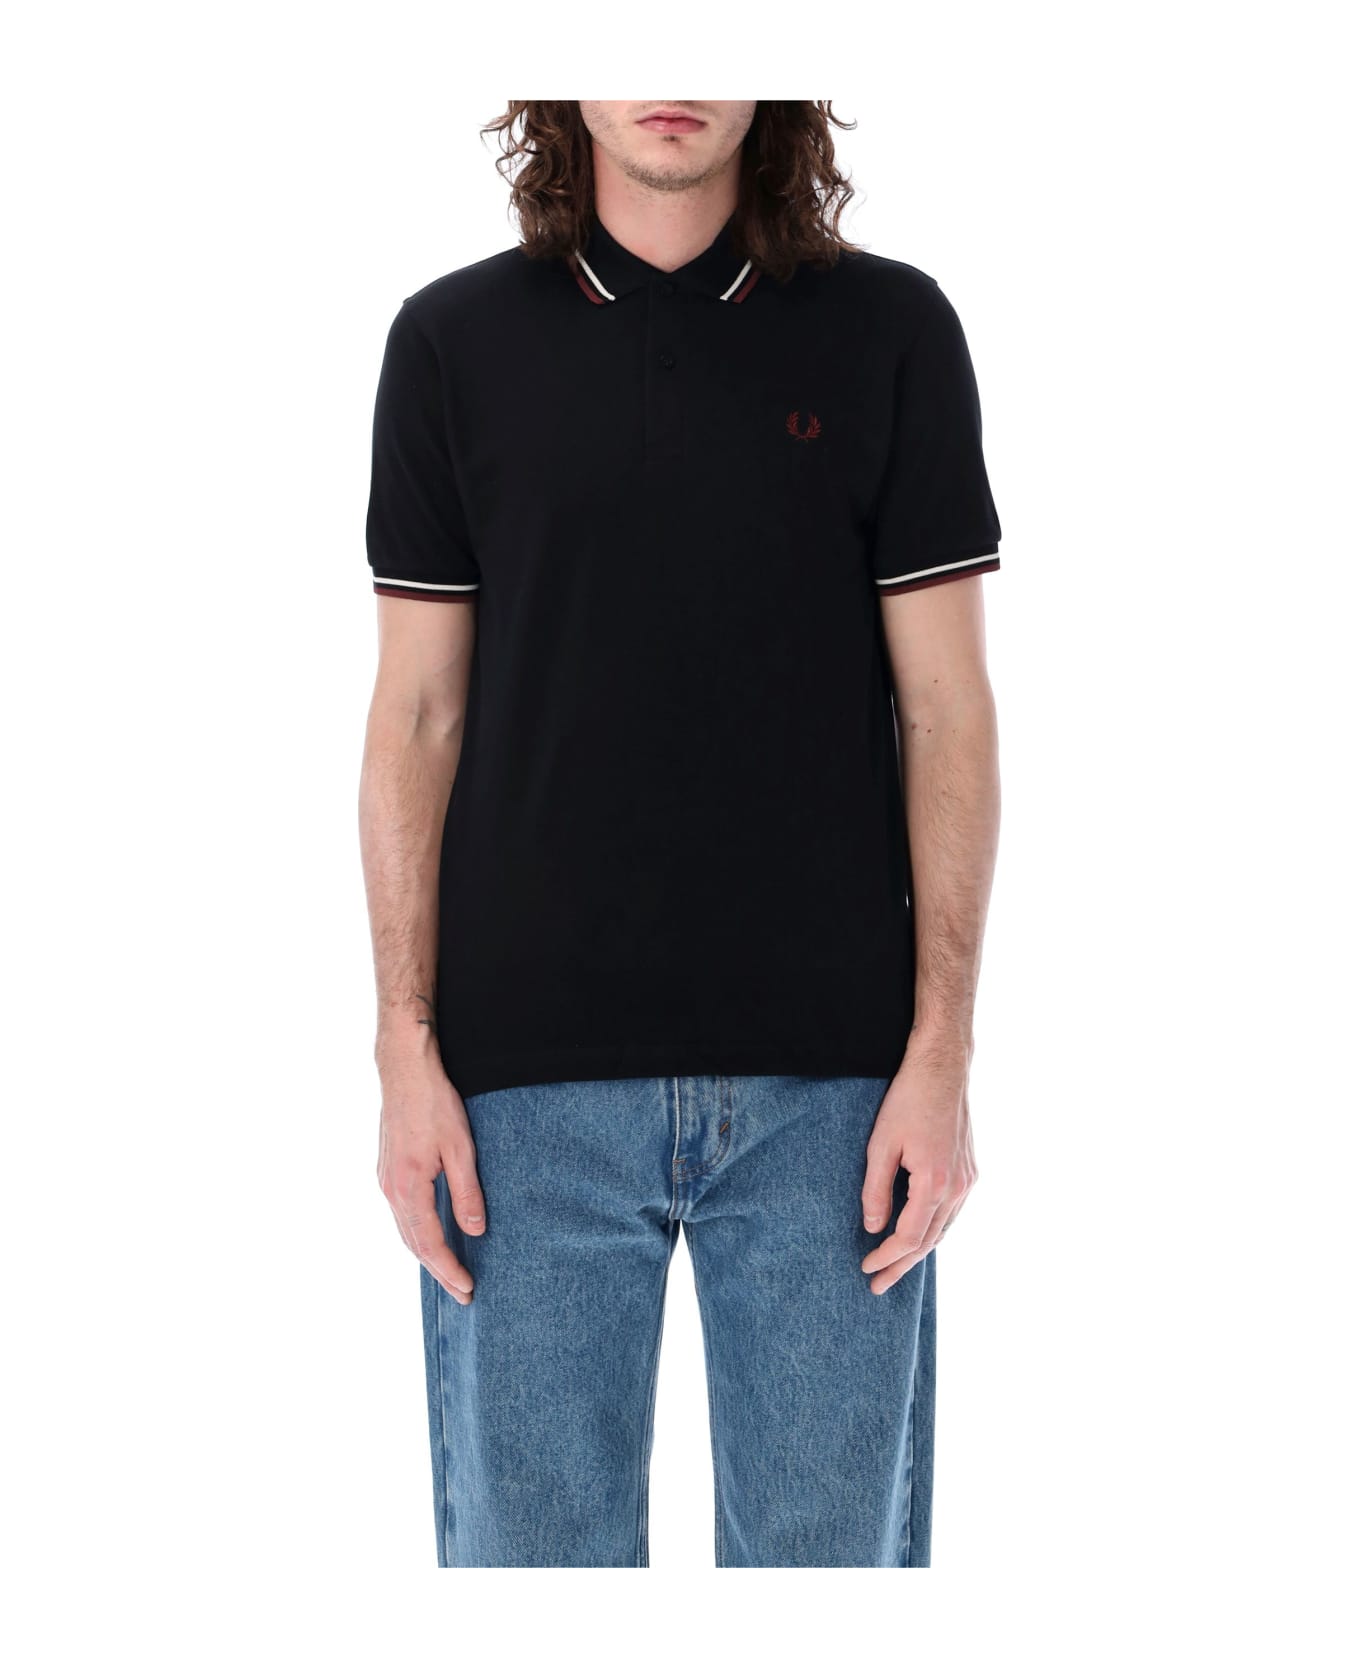 Fred Perry The Original Twin Tipped Piqué Polo Shirt - BLACK BURGUNDY